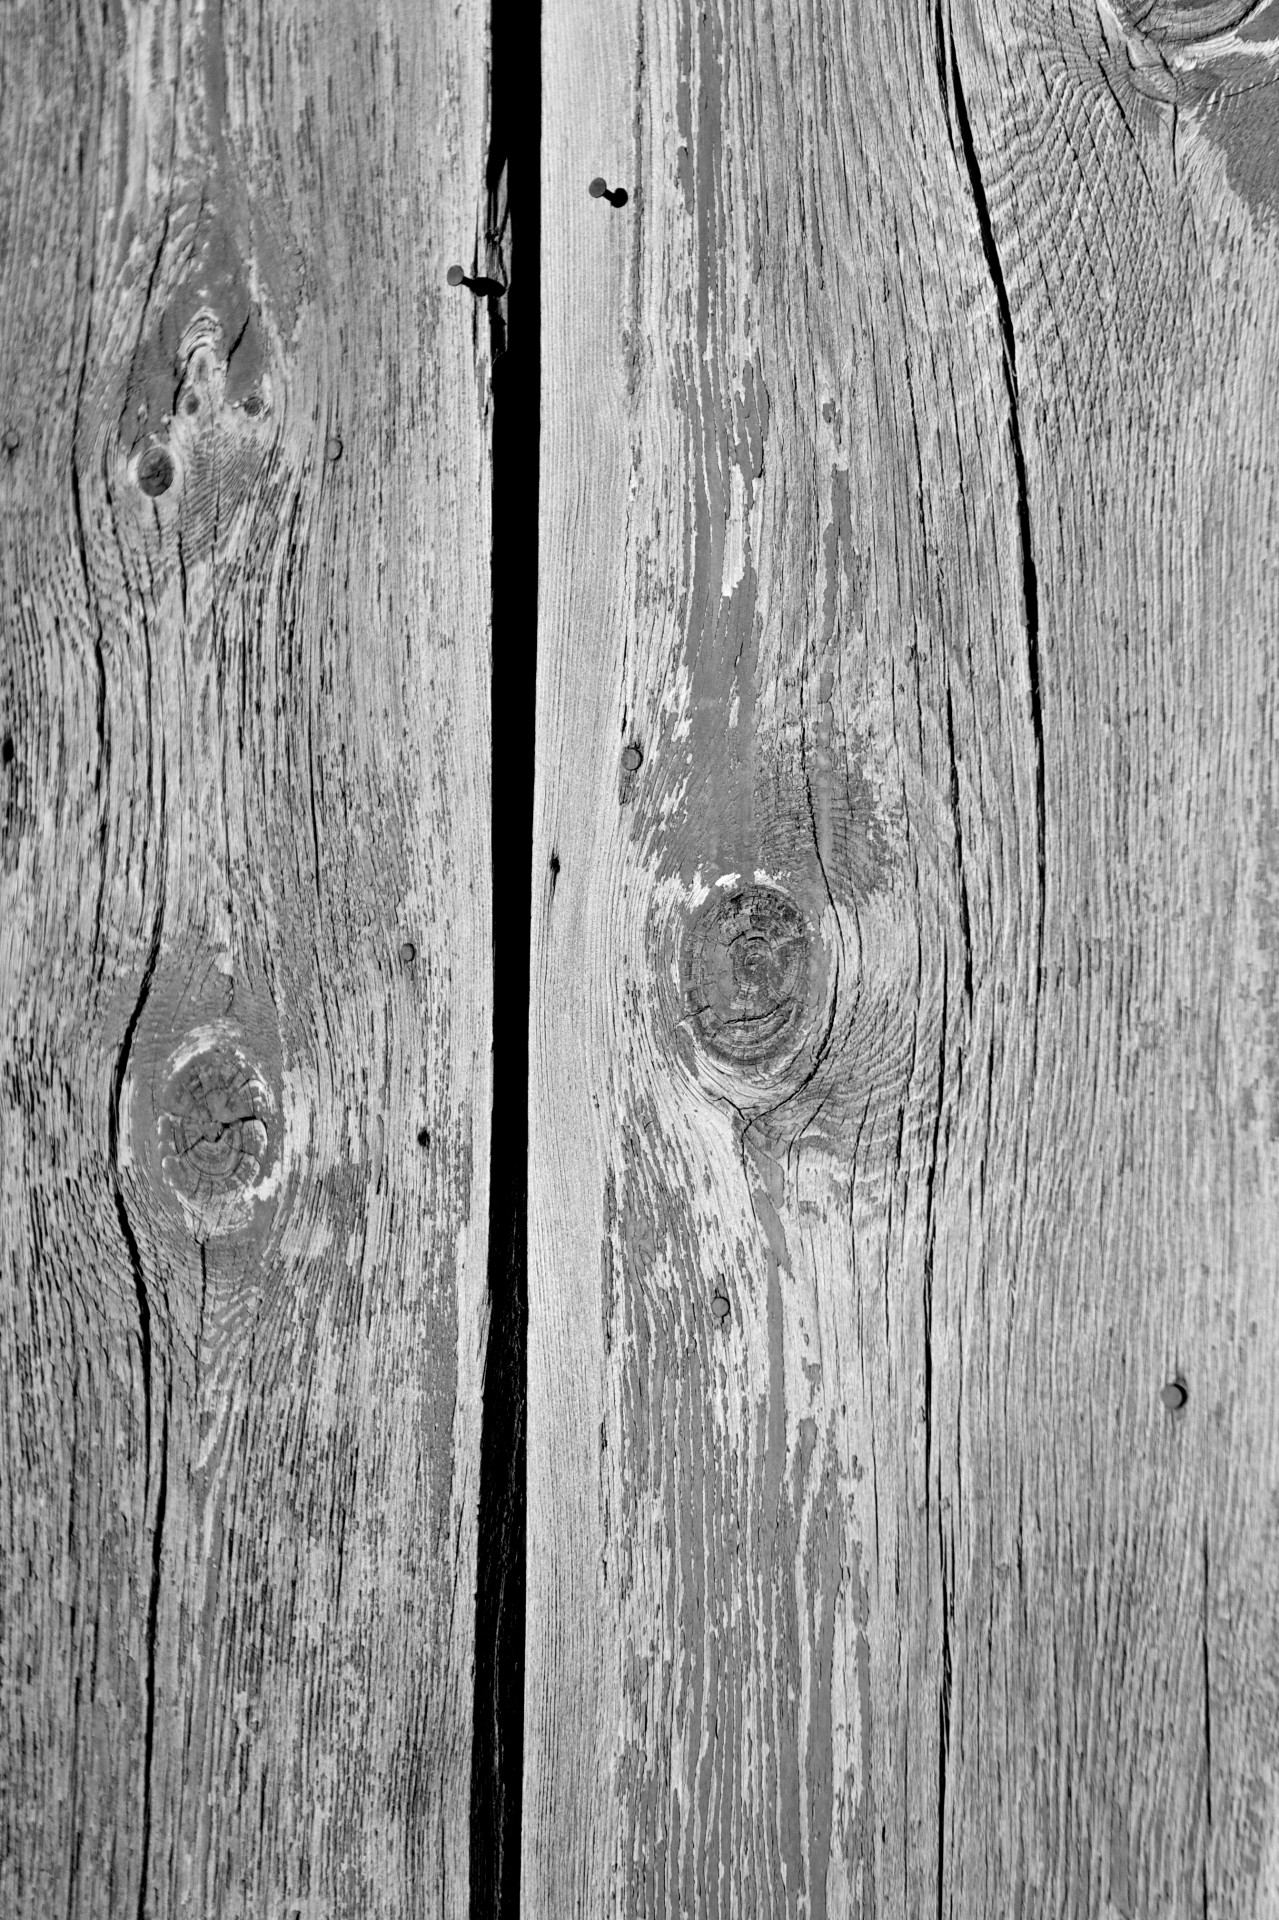 Aging wood grain detailed in black and white.